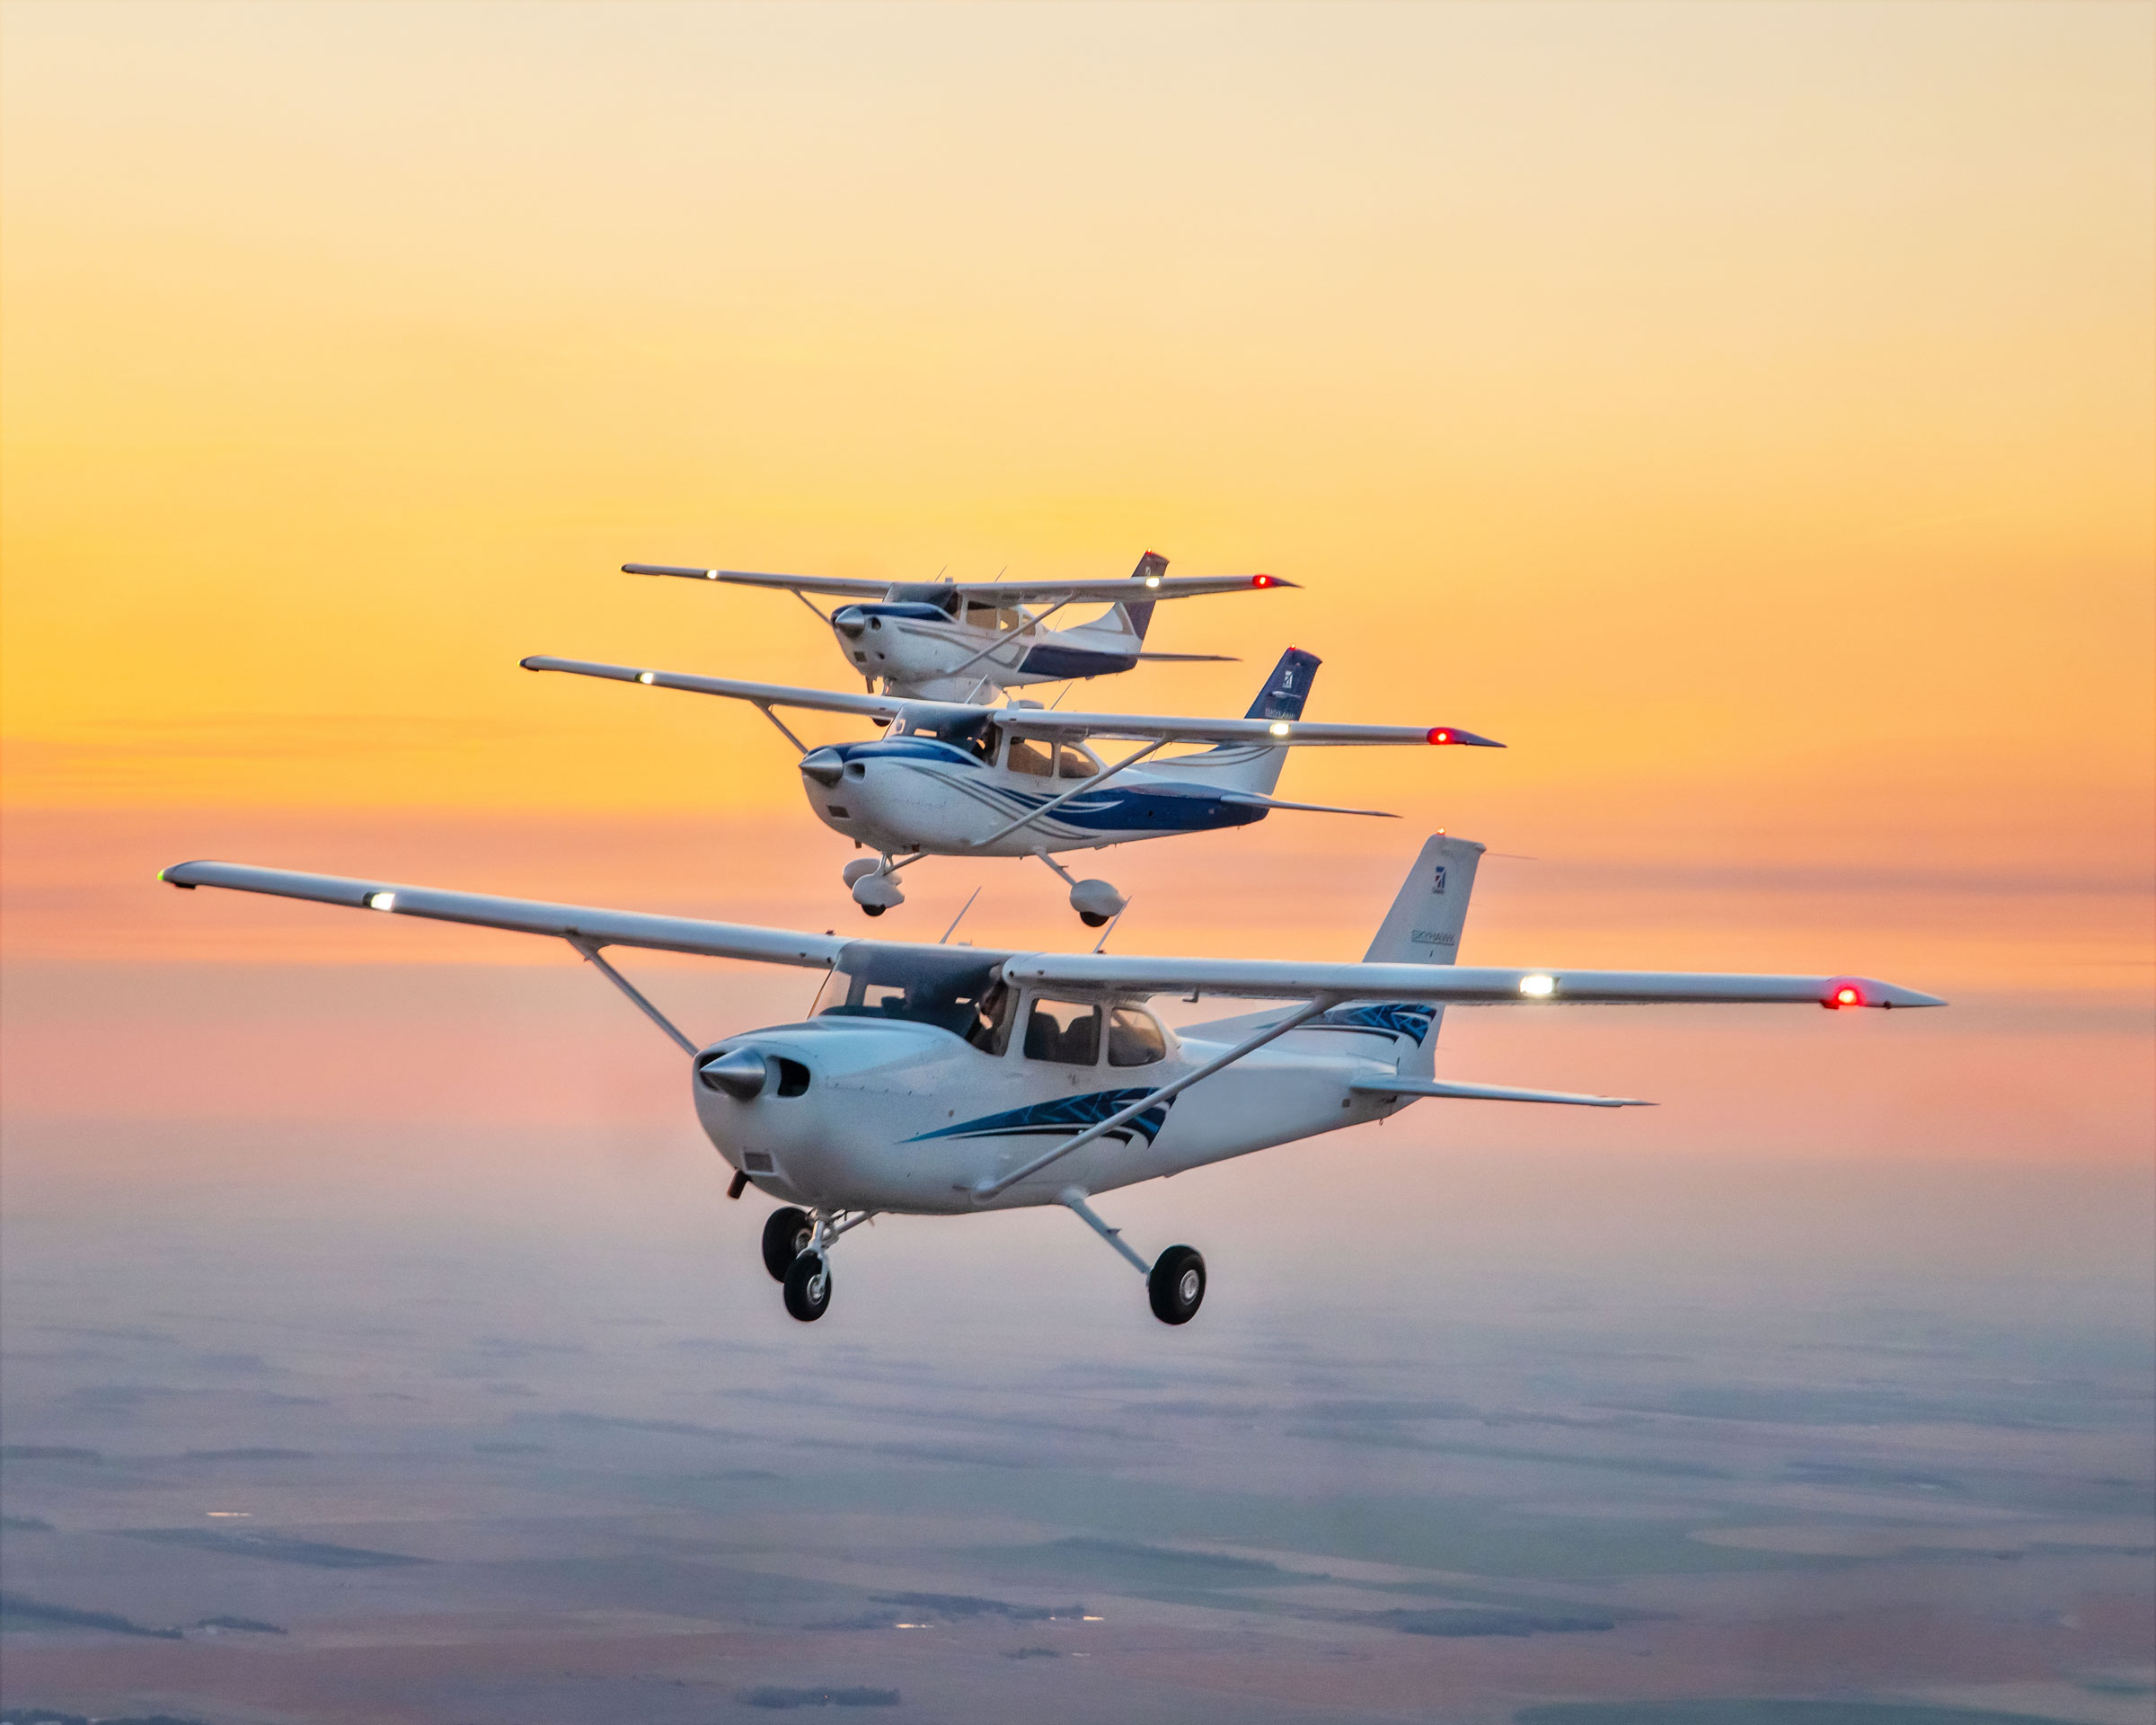 More environmentally friendly fuels approved for Cessna piston-powered aircraft